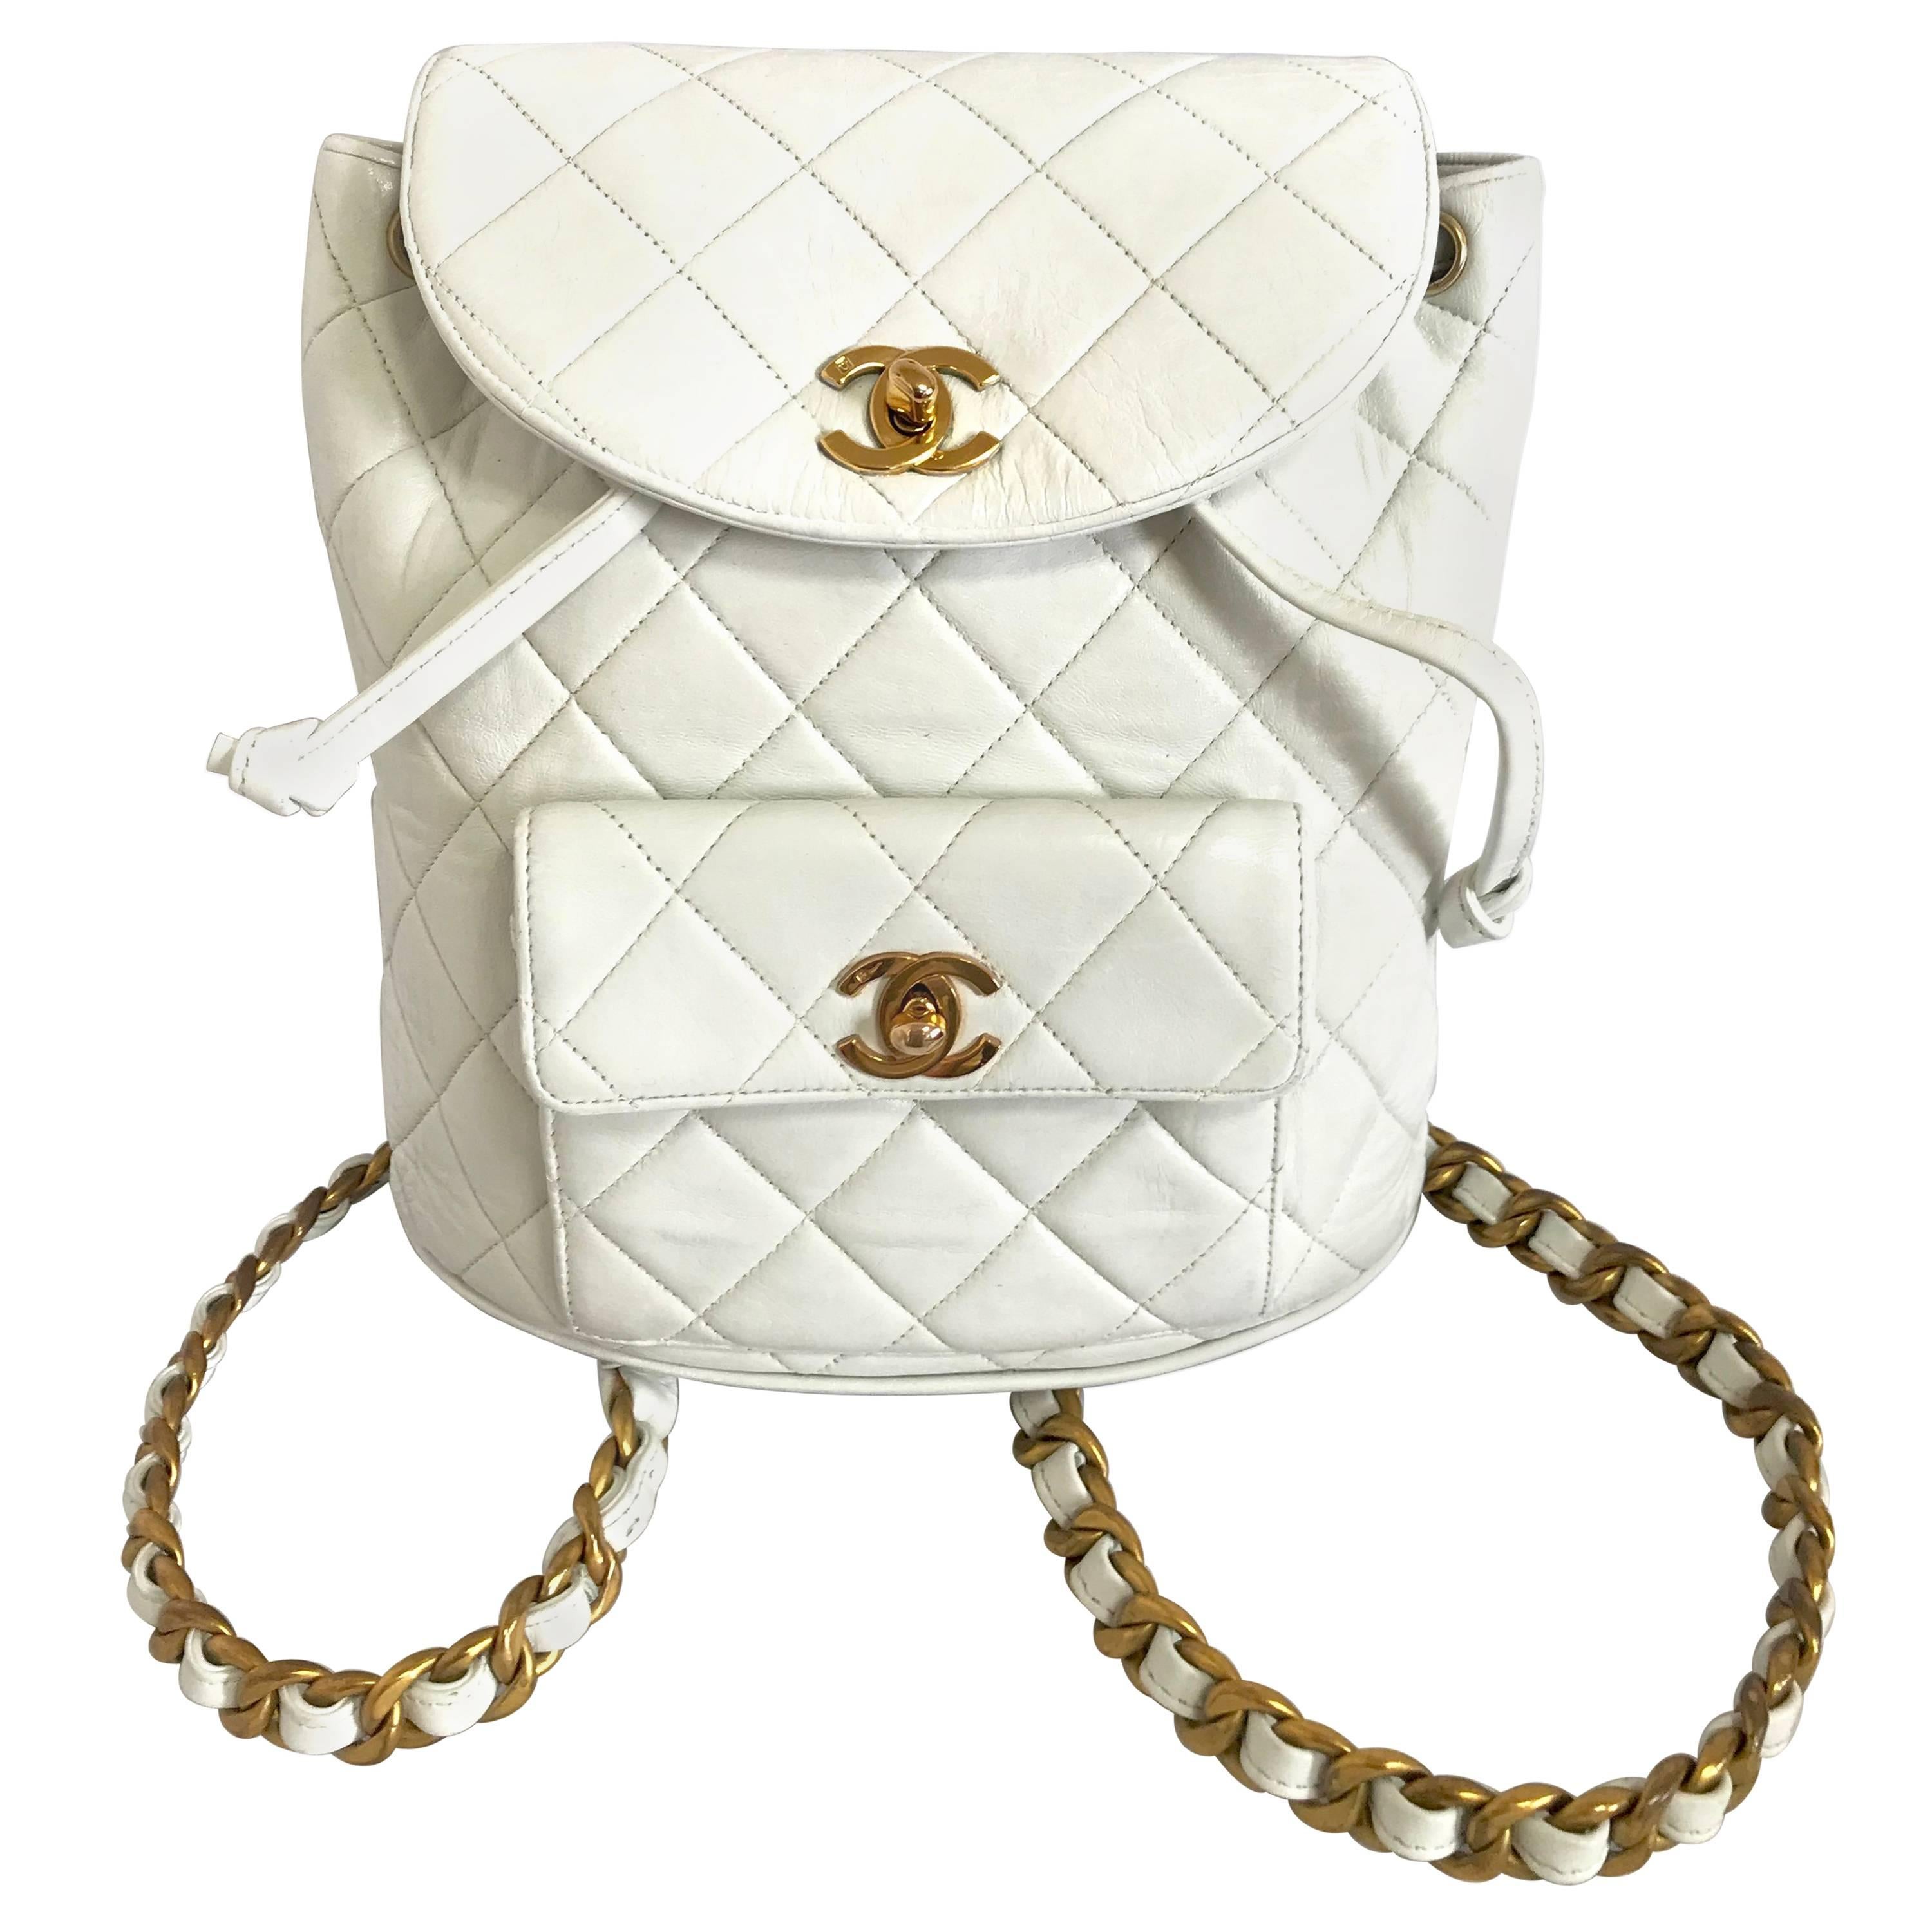 Vintage CHANEL white lamb leather backpack with golden chain and CC closure.